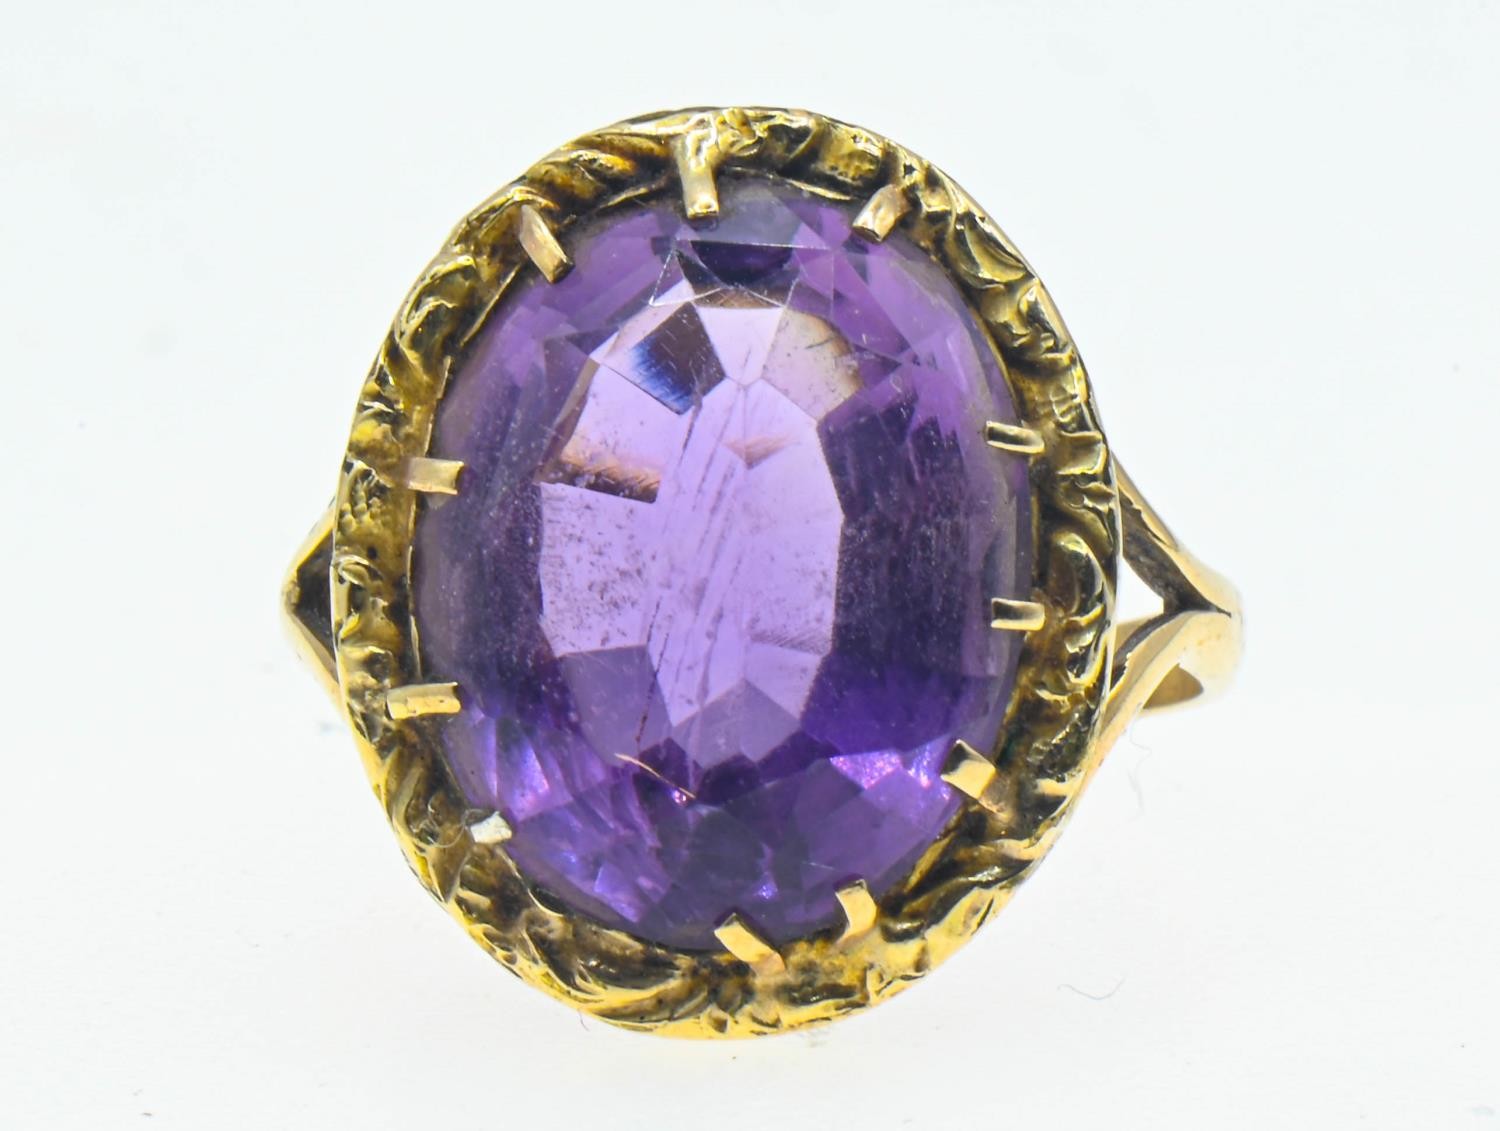 Amethyst set yellow metal ring. Oval mixed cut amethyst approximately 19mm x 14mm. Size T 1/2. Gross